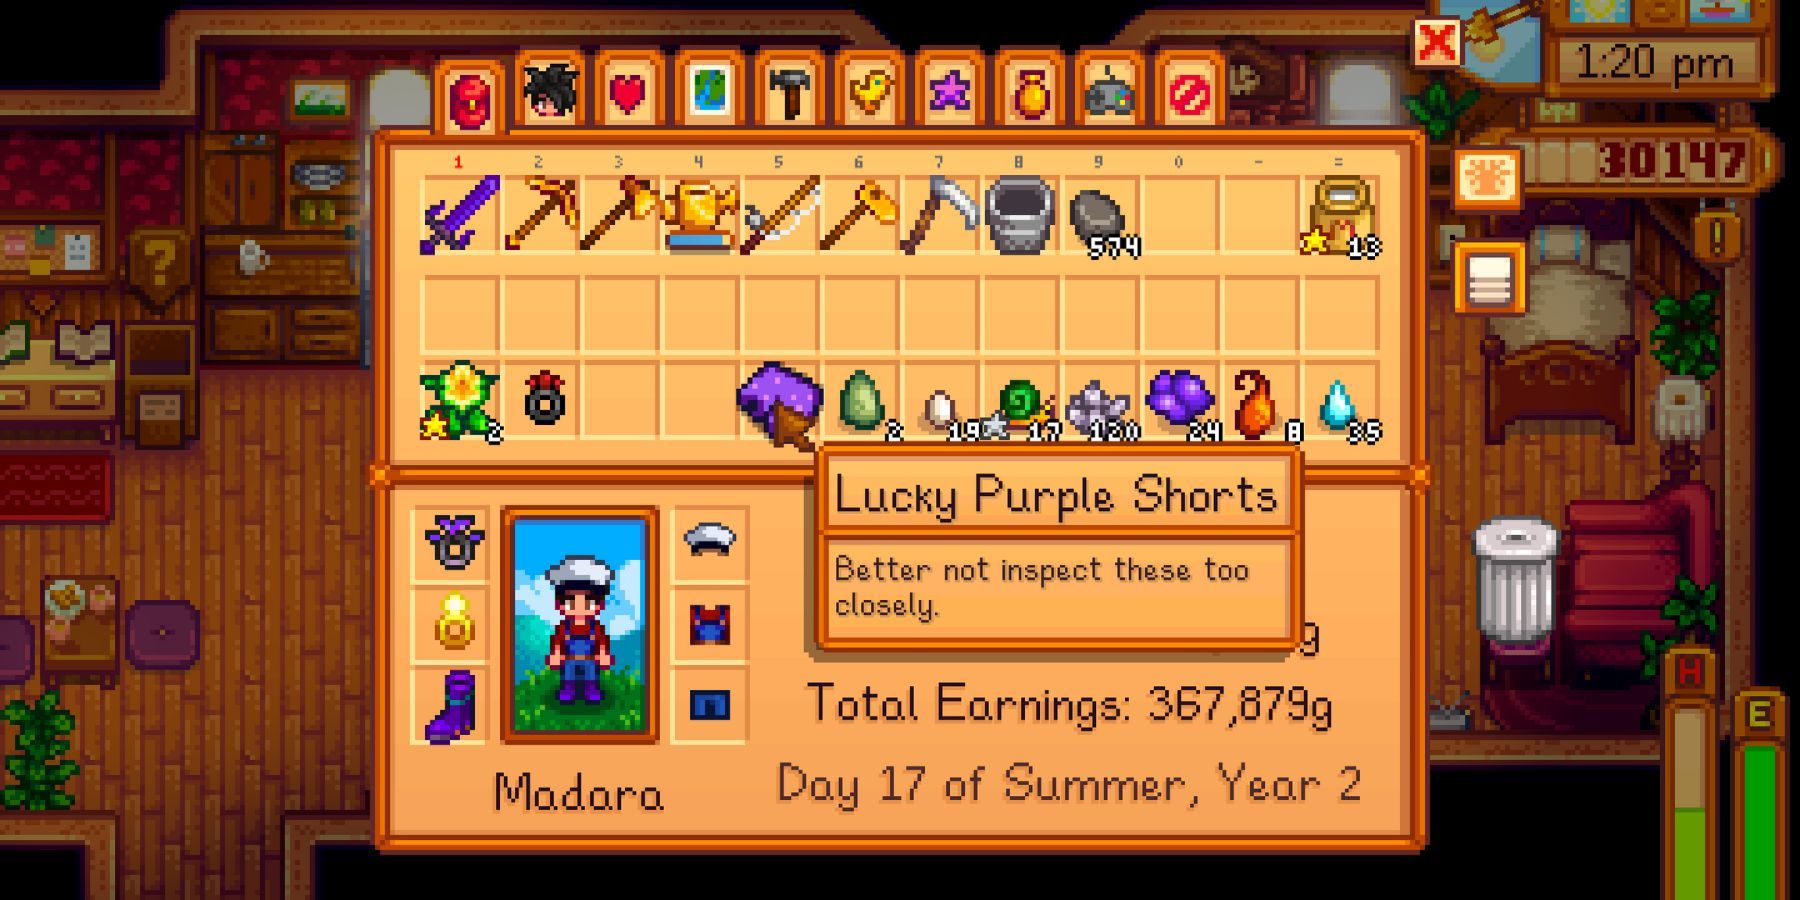 The in-game description of Lucky Purple Shorts in Stardew Valley